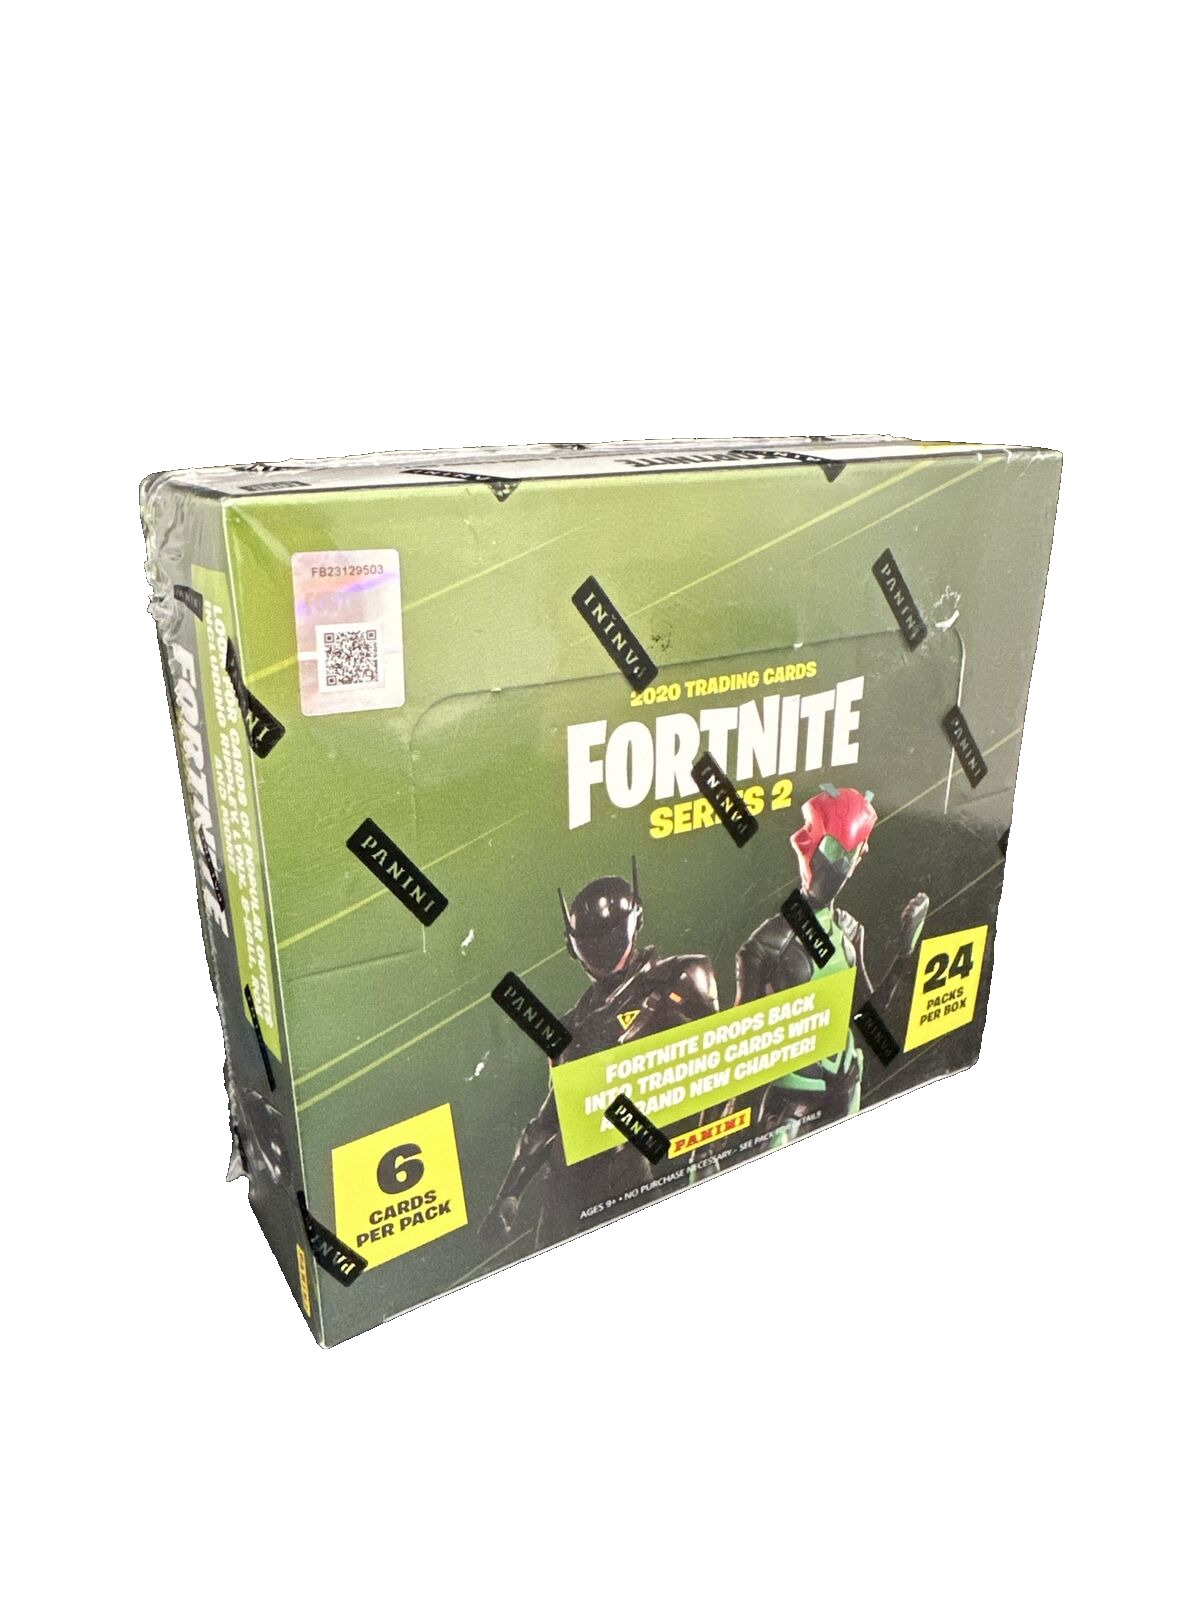 2020 Panini Fortnite Series 2 Trading Cards Box FACTORY SEALED